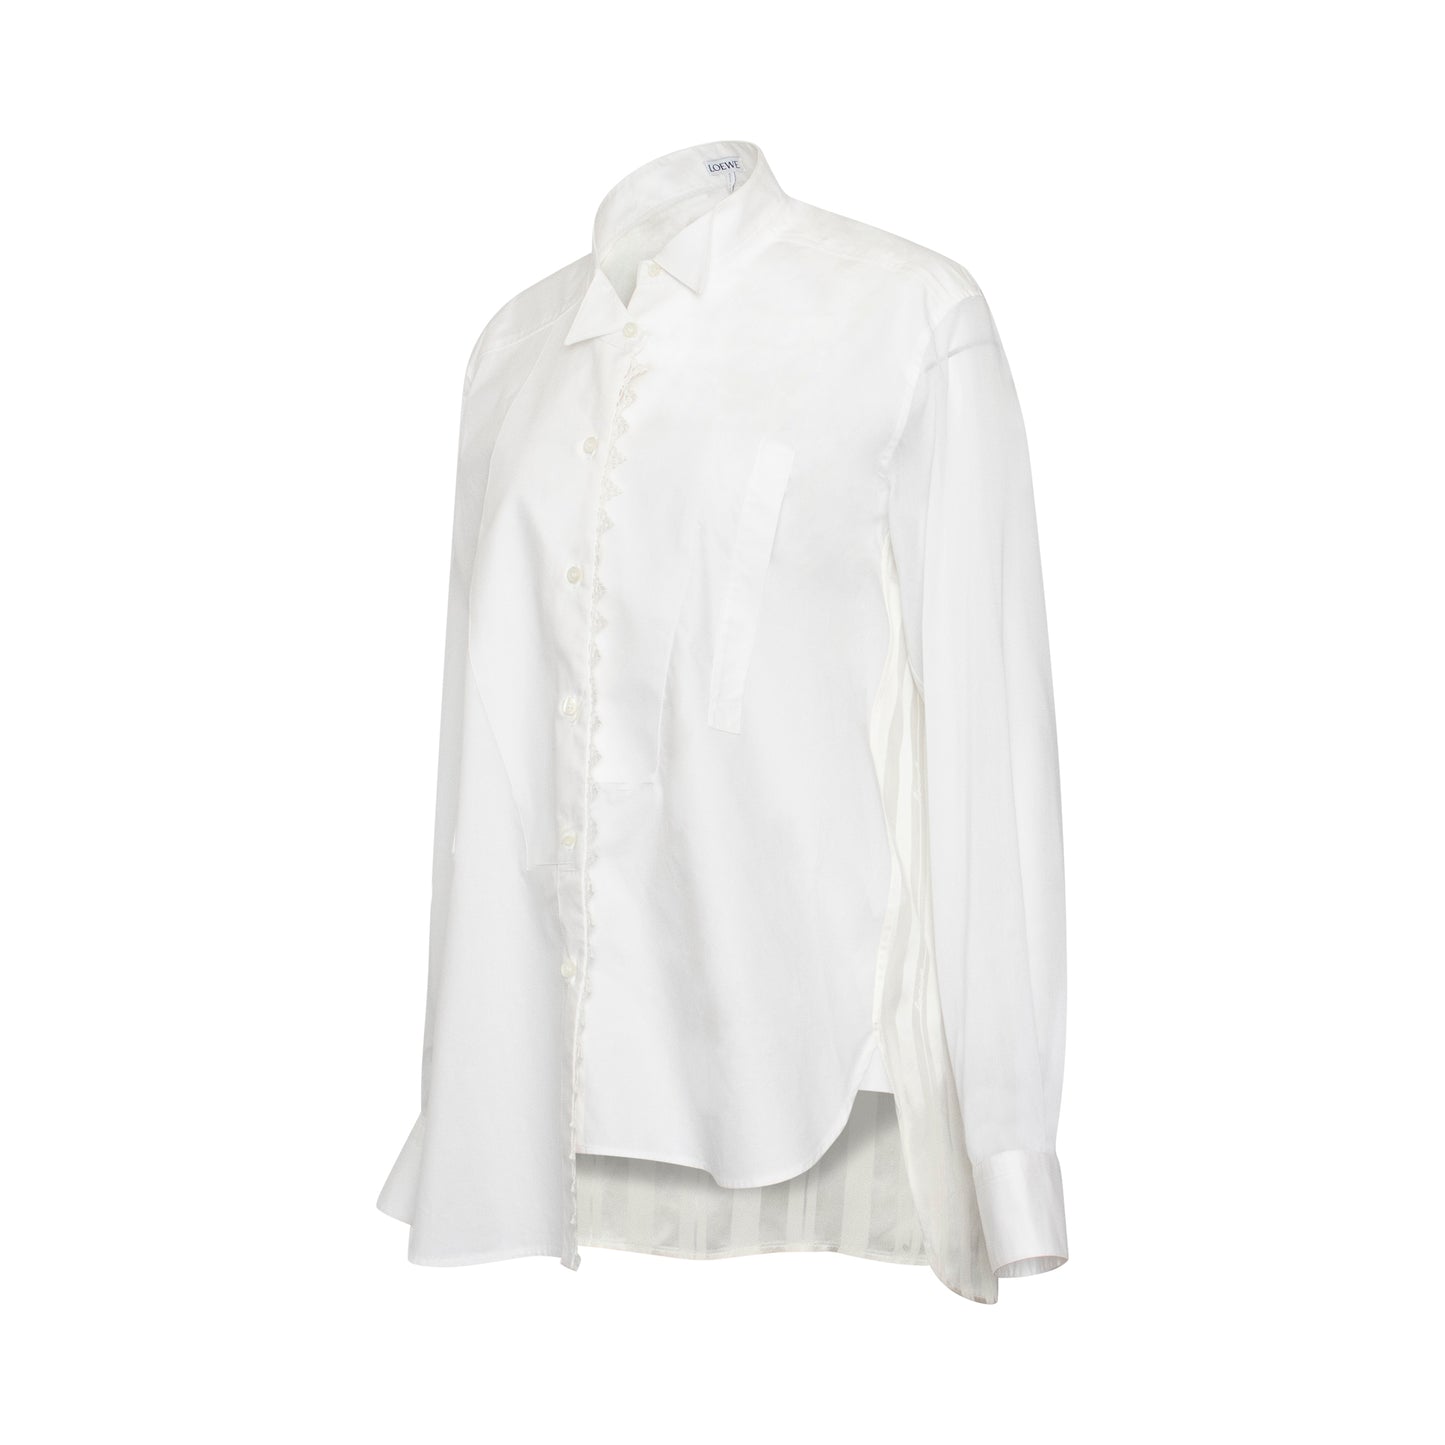 Lace Trim Asymetric Shirt in White